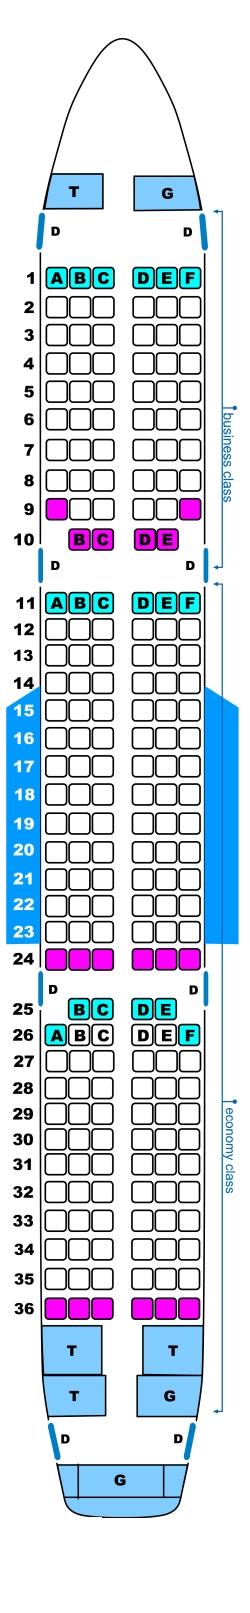 Seat map for Spanair Airbus A321